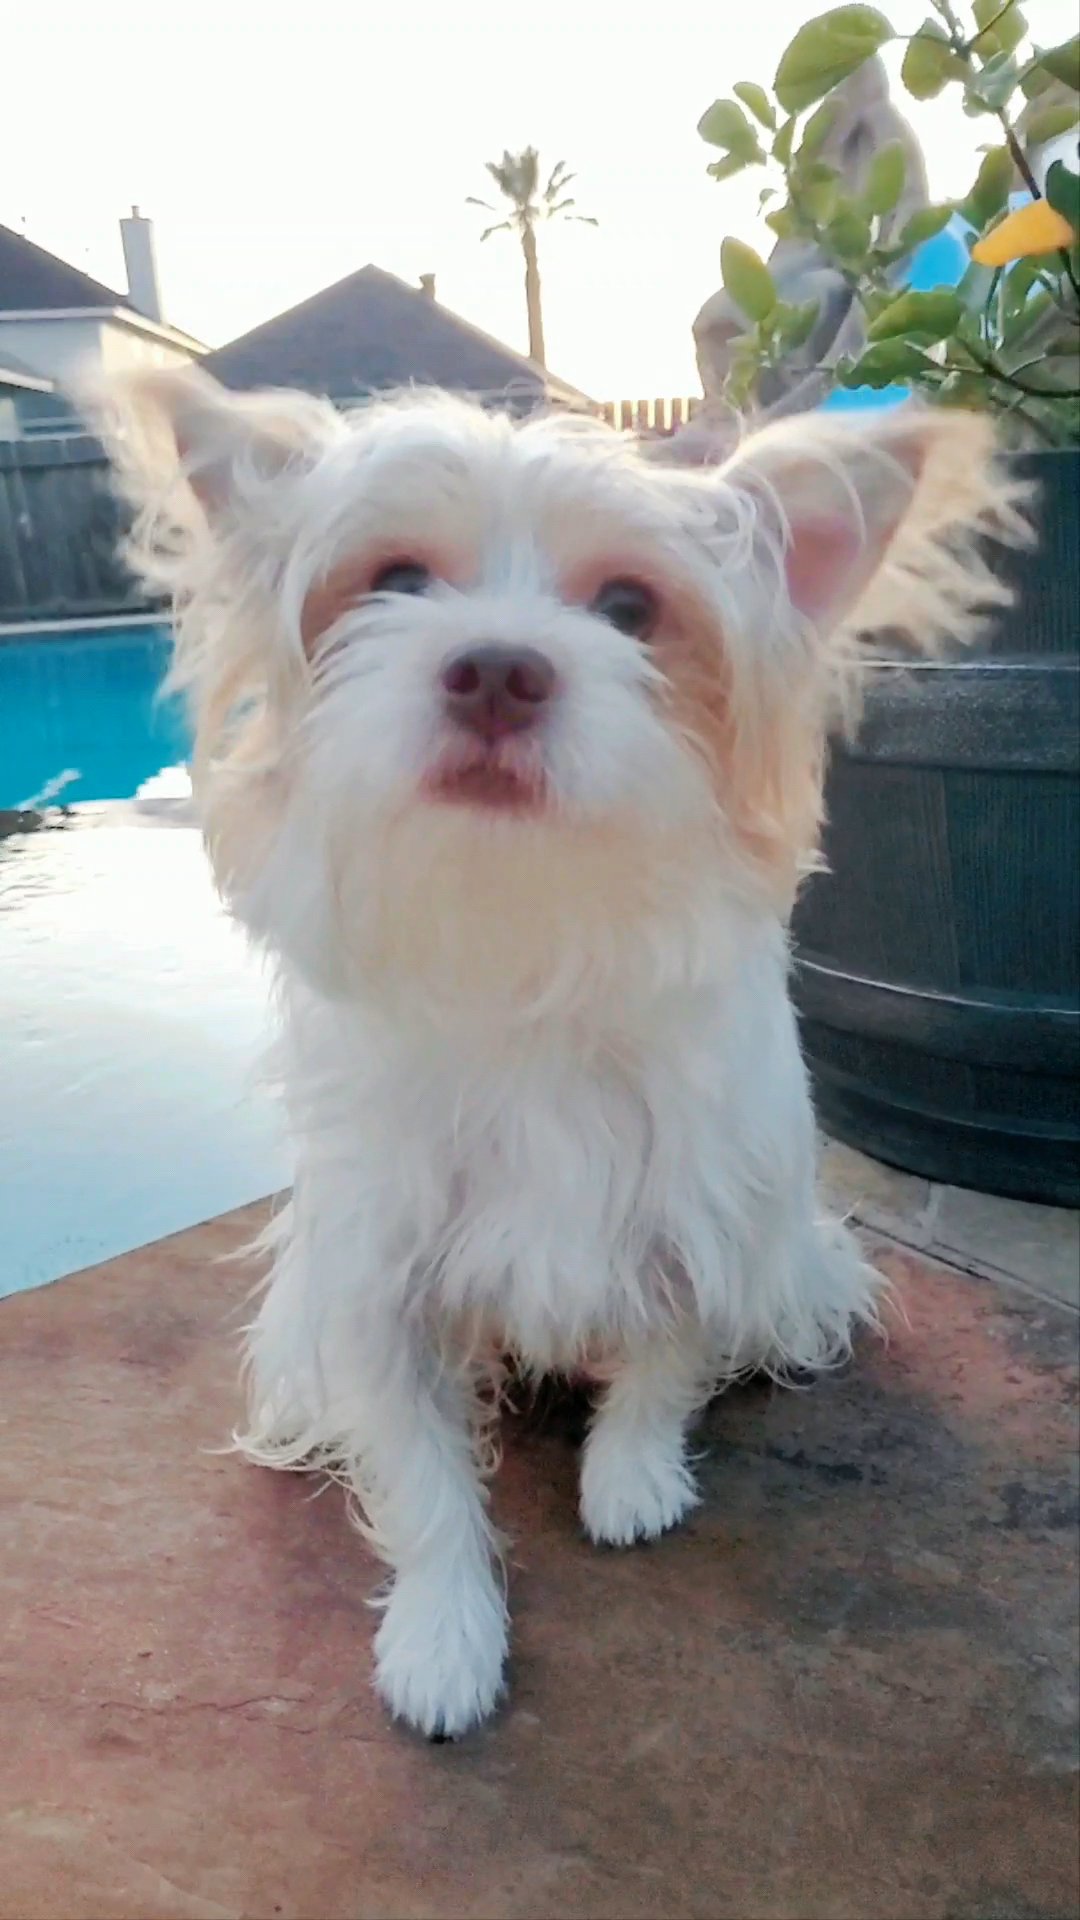 *Homed* Mickey, Chocolate Parti in Pearland, Texas